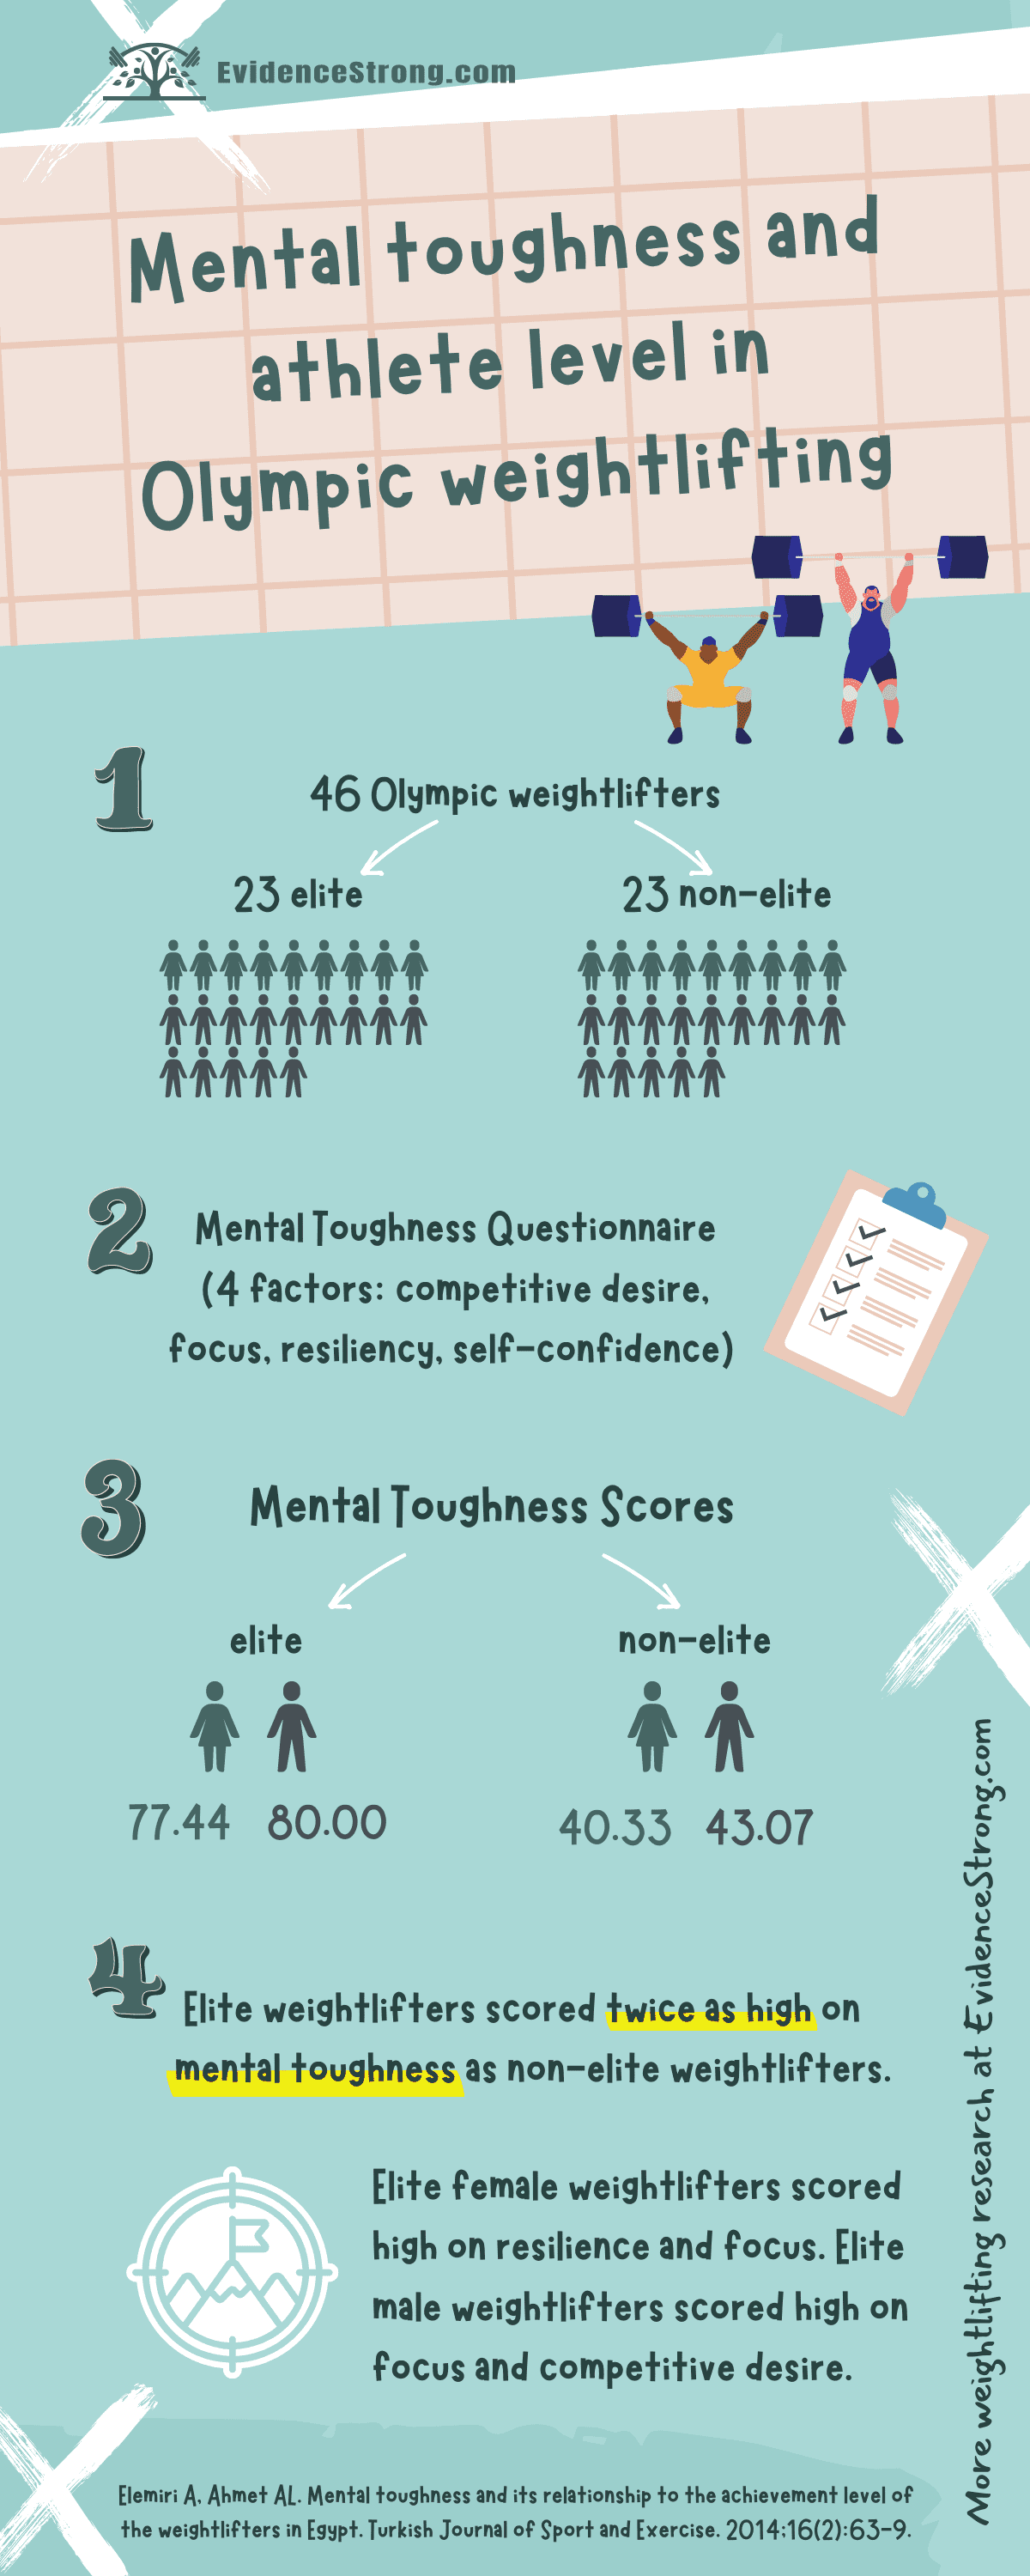 Mental toughness and athlete level in Olympic weightlifting - infographic